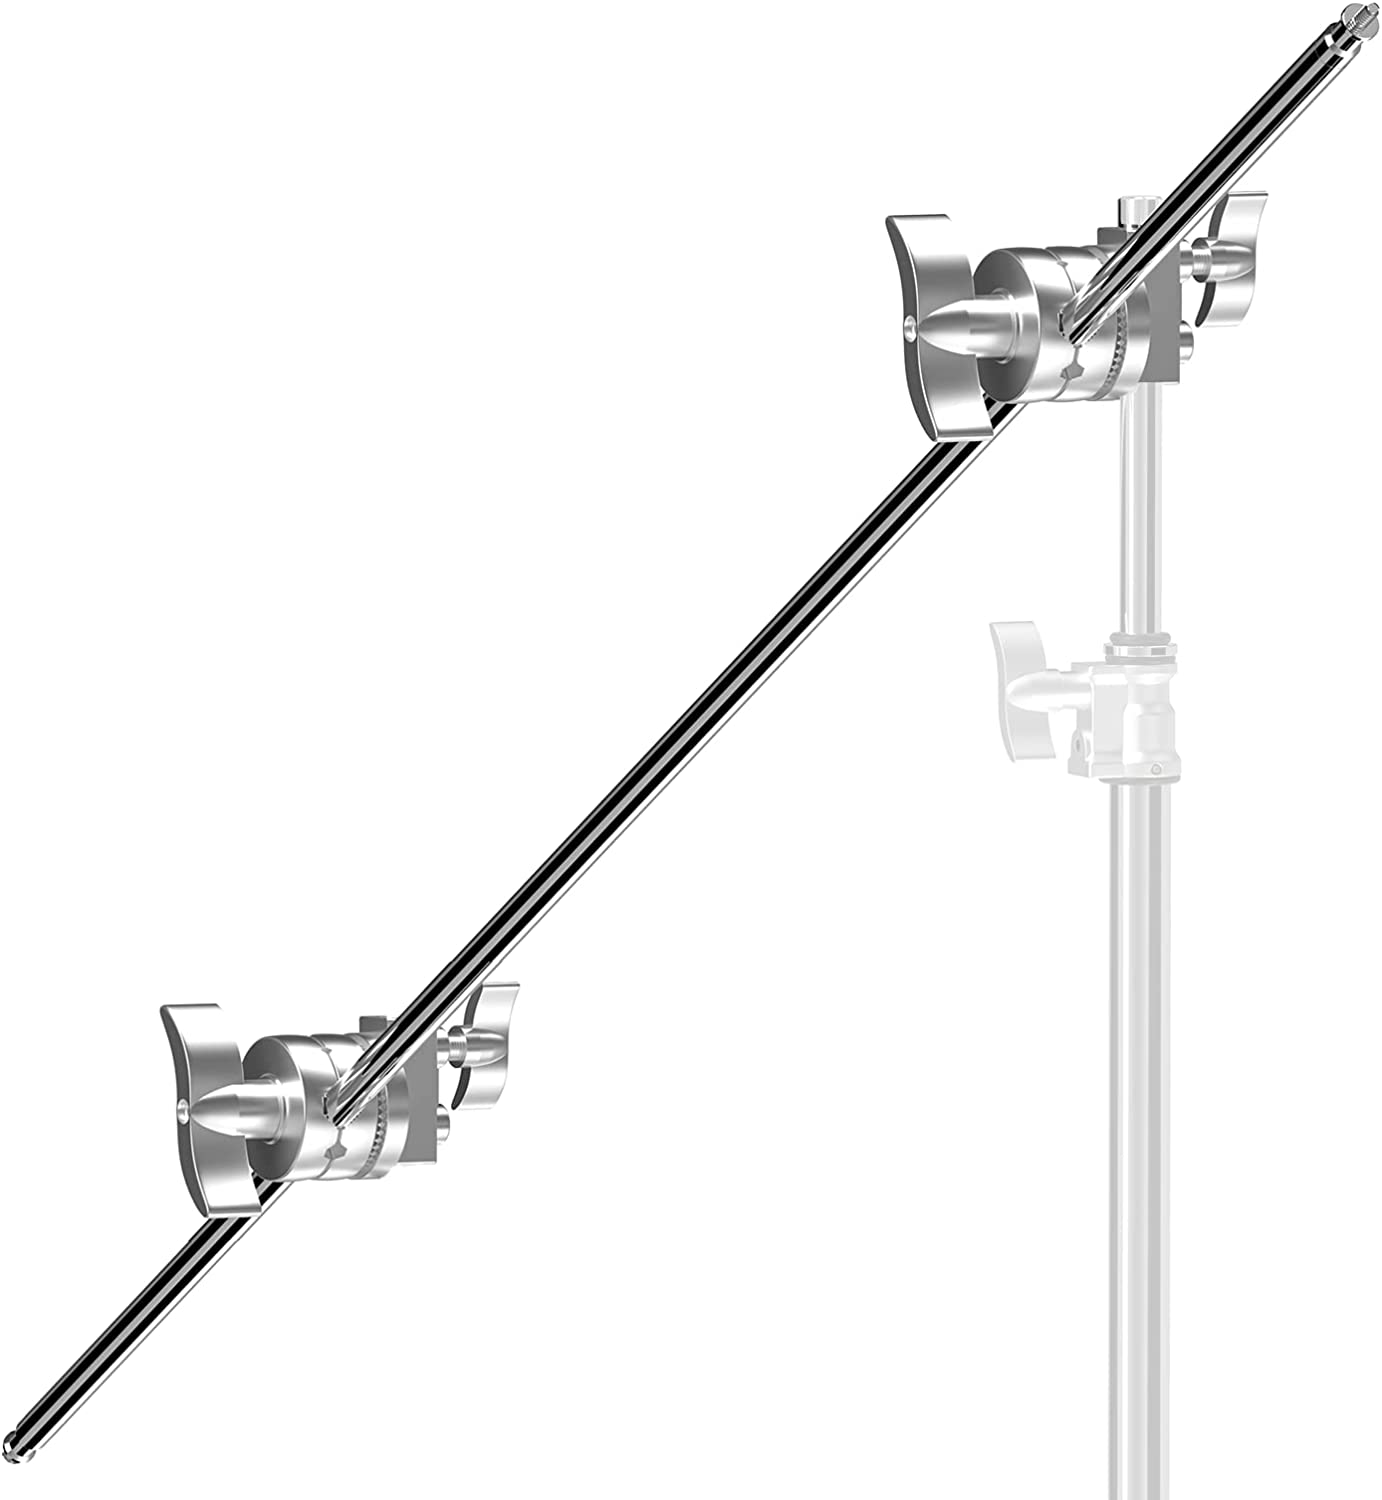 50 inch Extension Grip Boom Arm with 2 Swivel Grip Heads